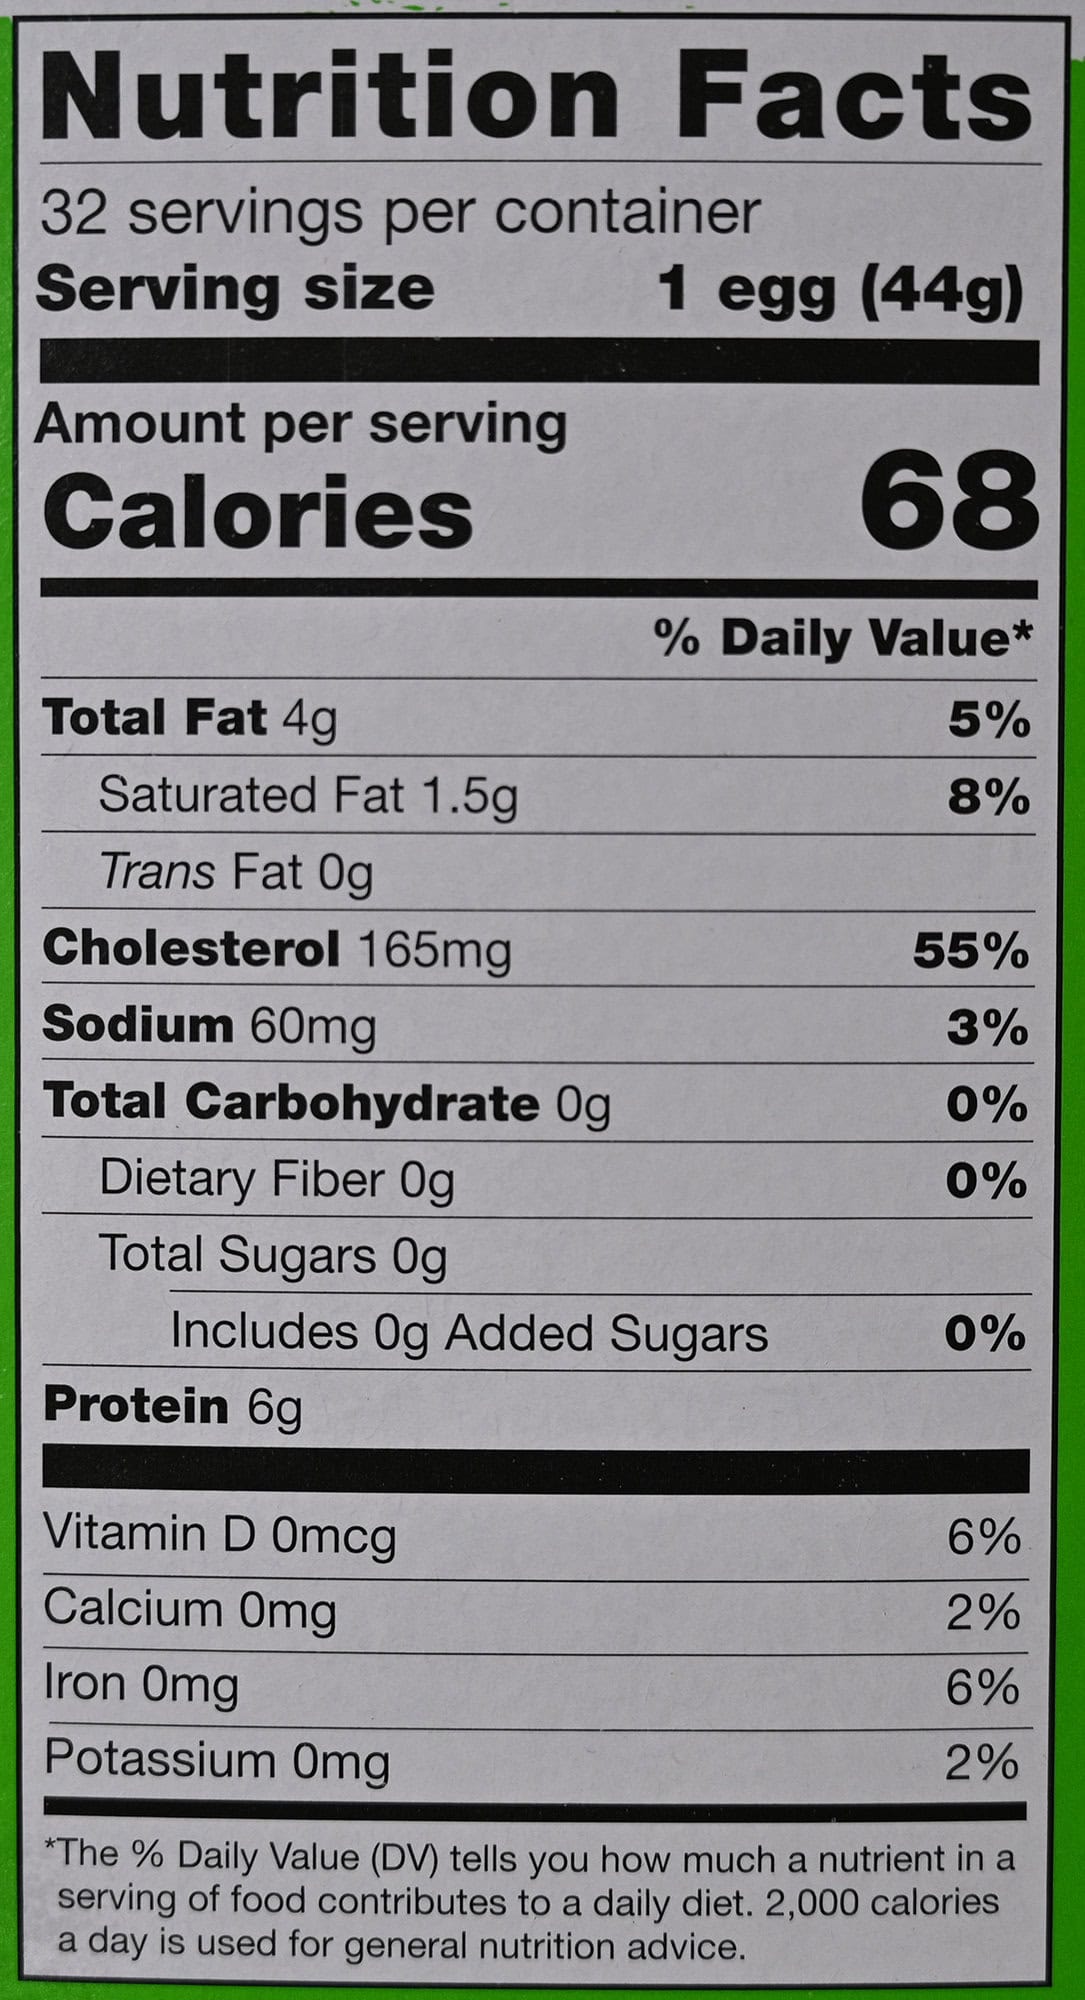 Image of the nutrition facts for the eggs from the back of the package.